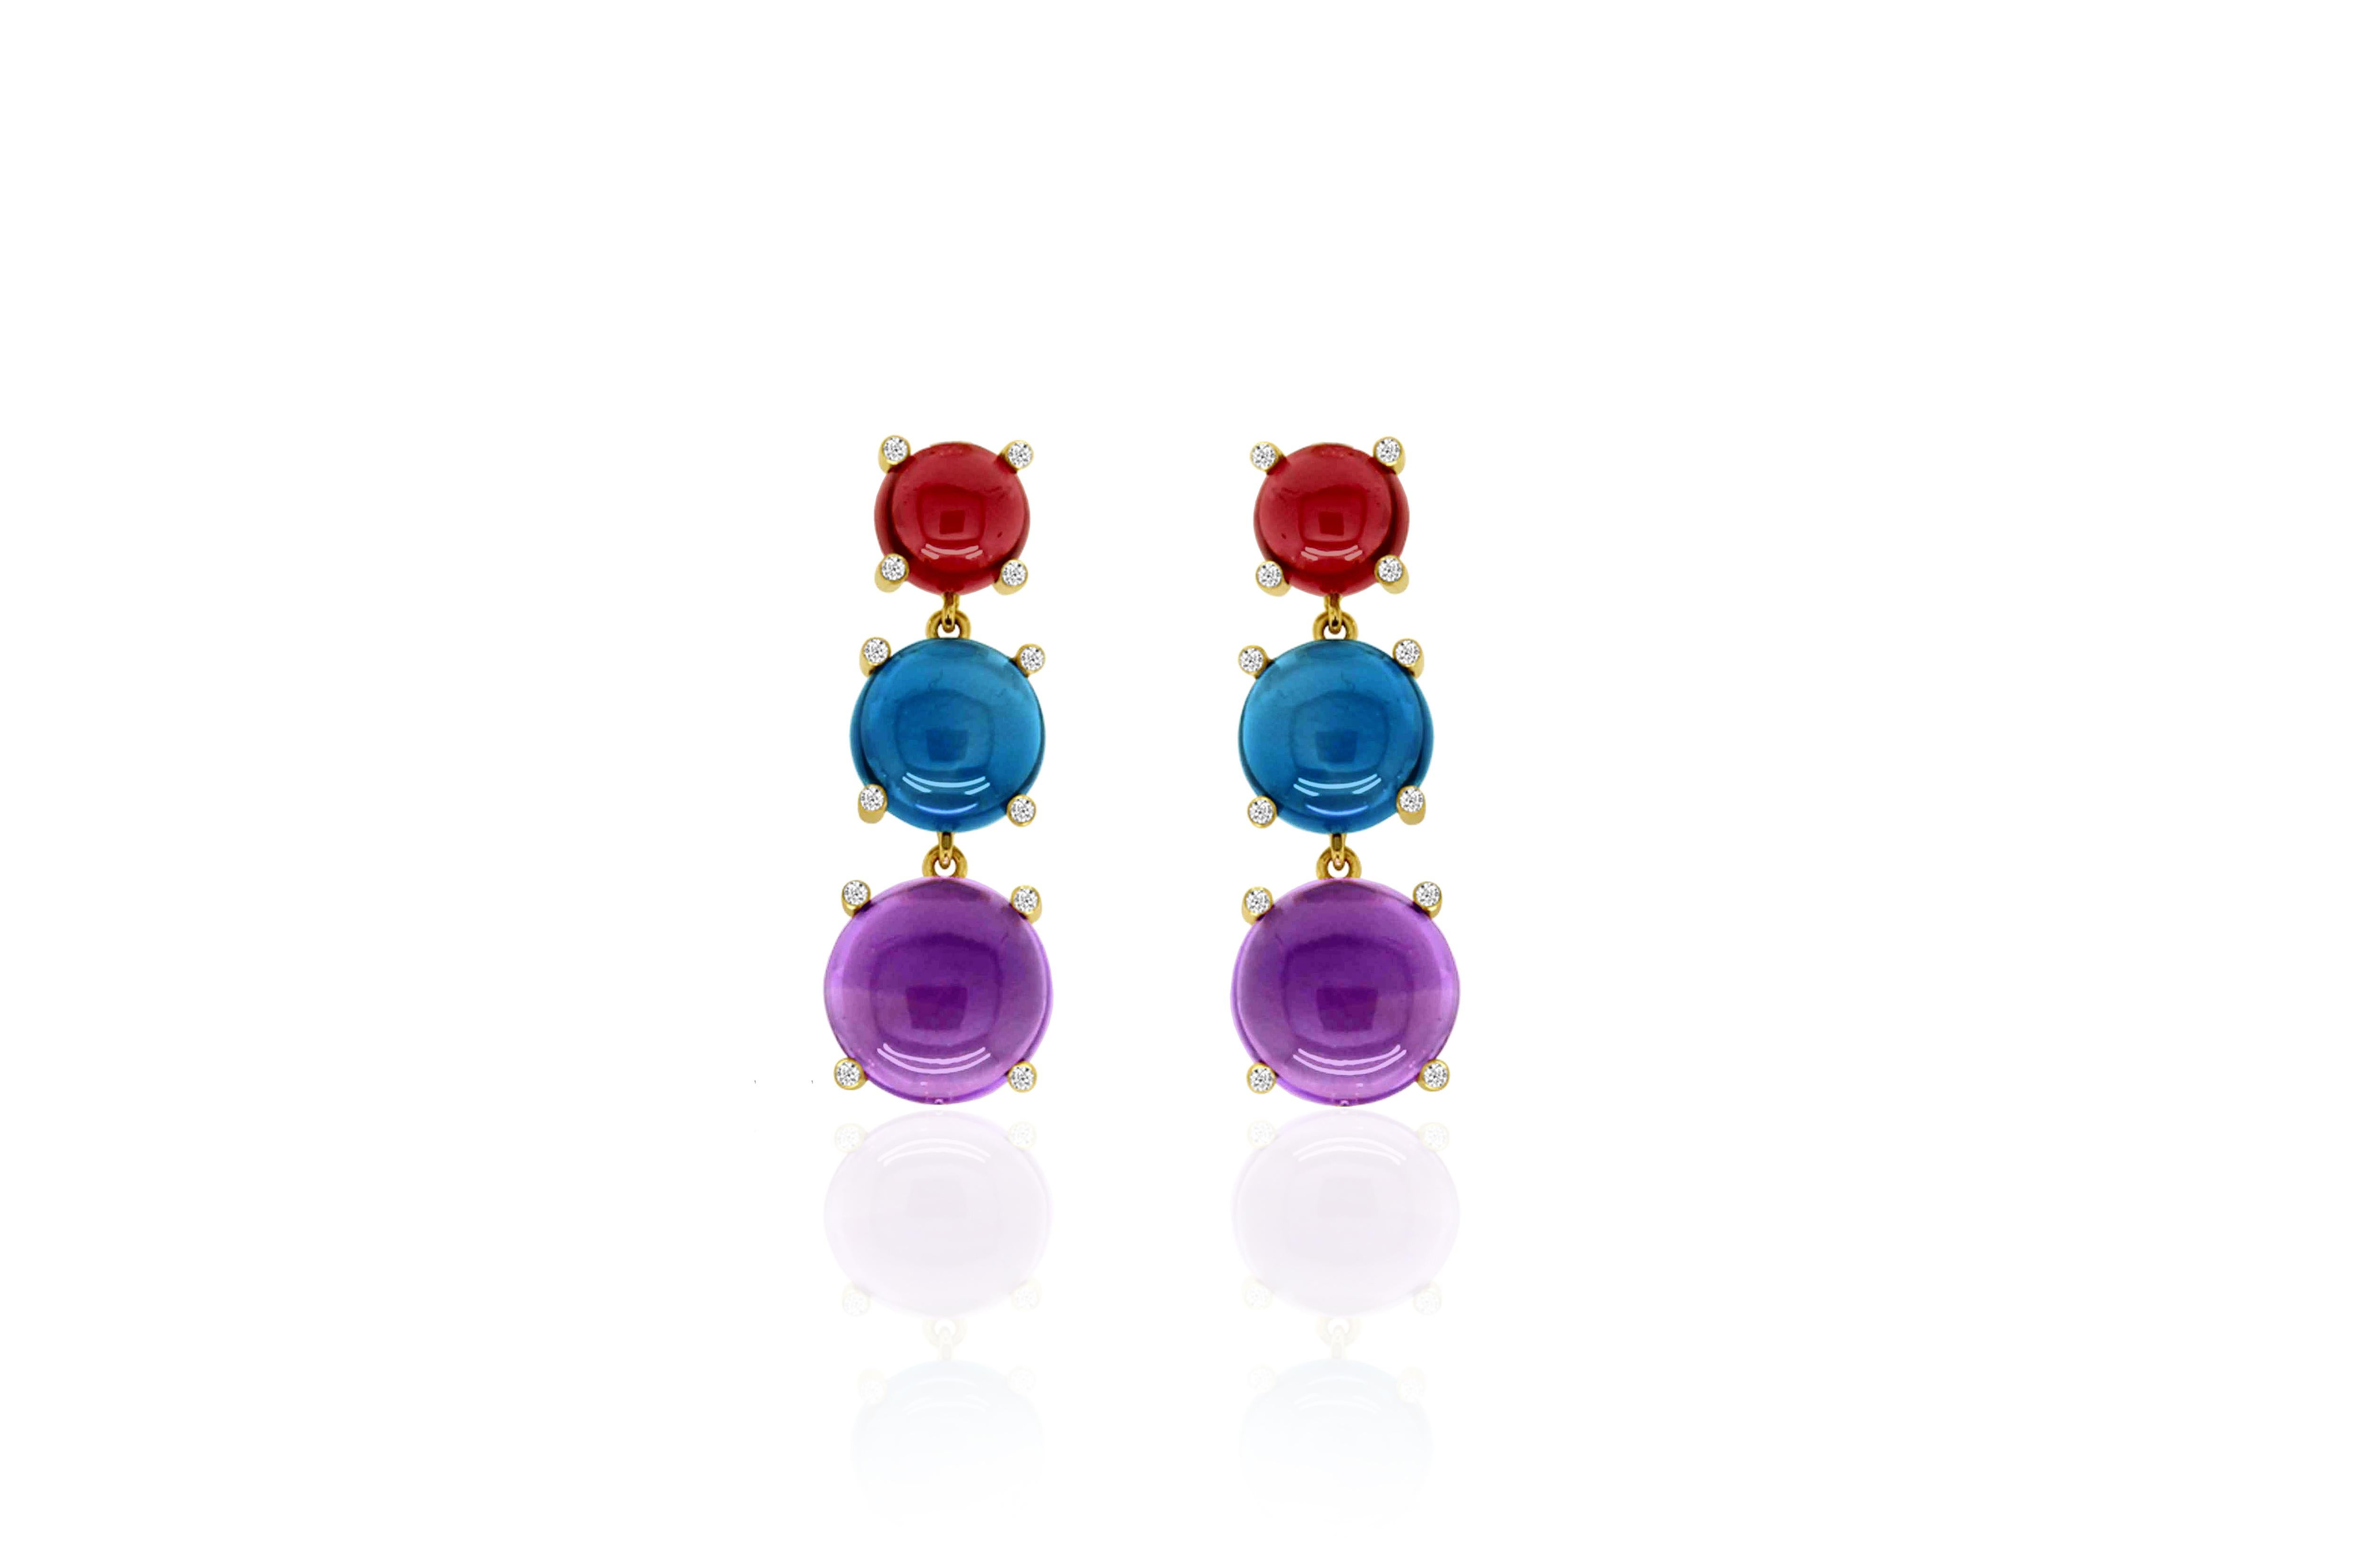 A very special statement piece is this Garnet, London Blue Topaz, Amethyst Cabs with Citrine Long Drop Earrings in 18K Yellow Gold, from our ‘Naughty’ Collection. This collection has dangerous curves tied with exotic colors. When unveiled, this